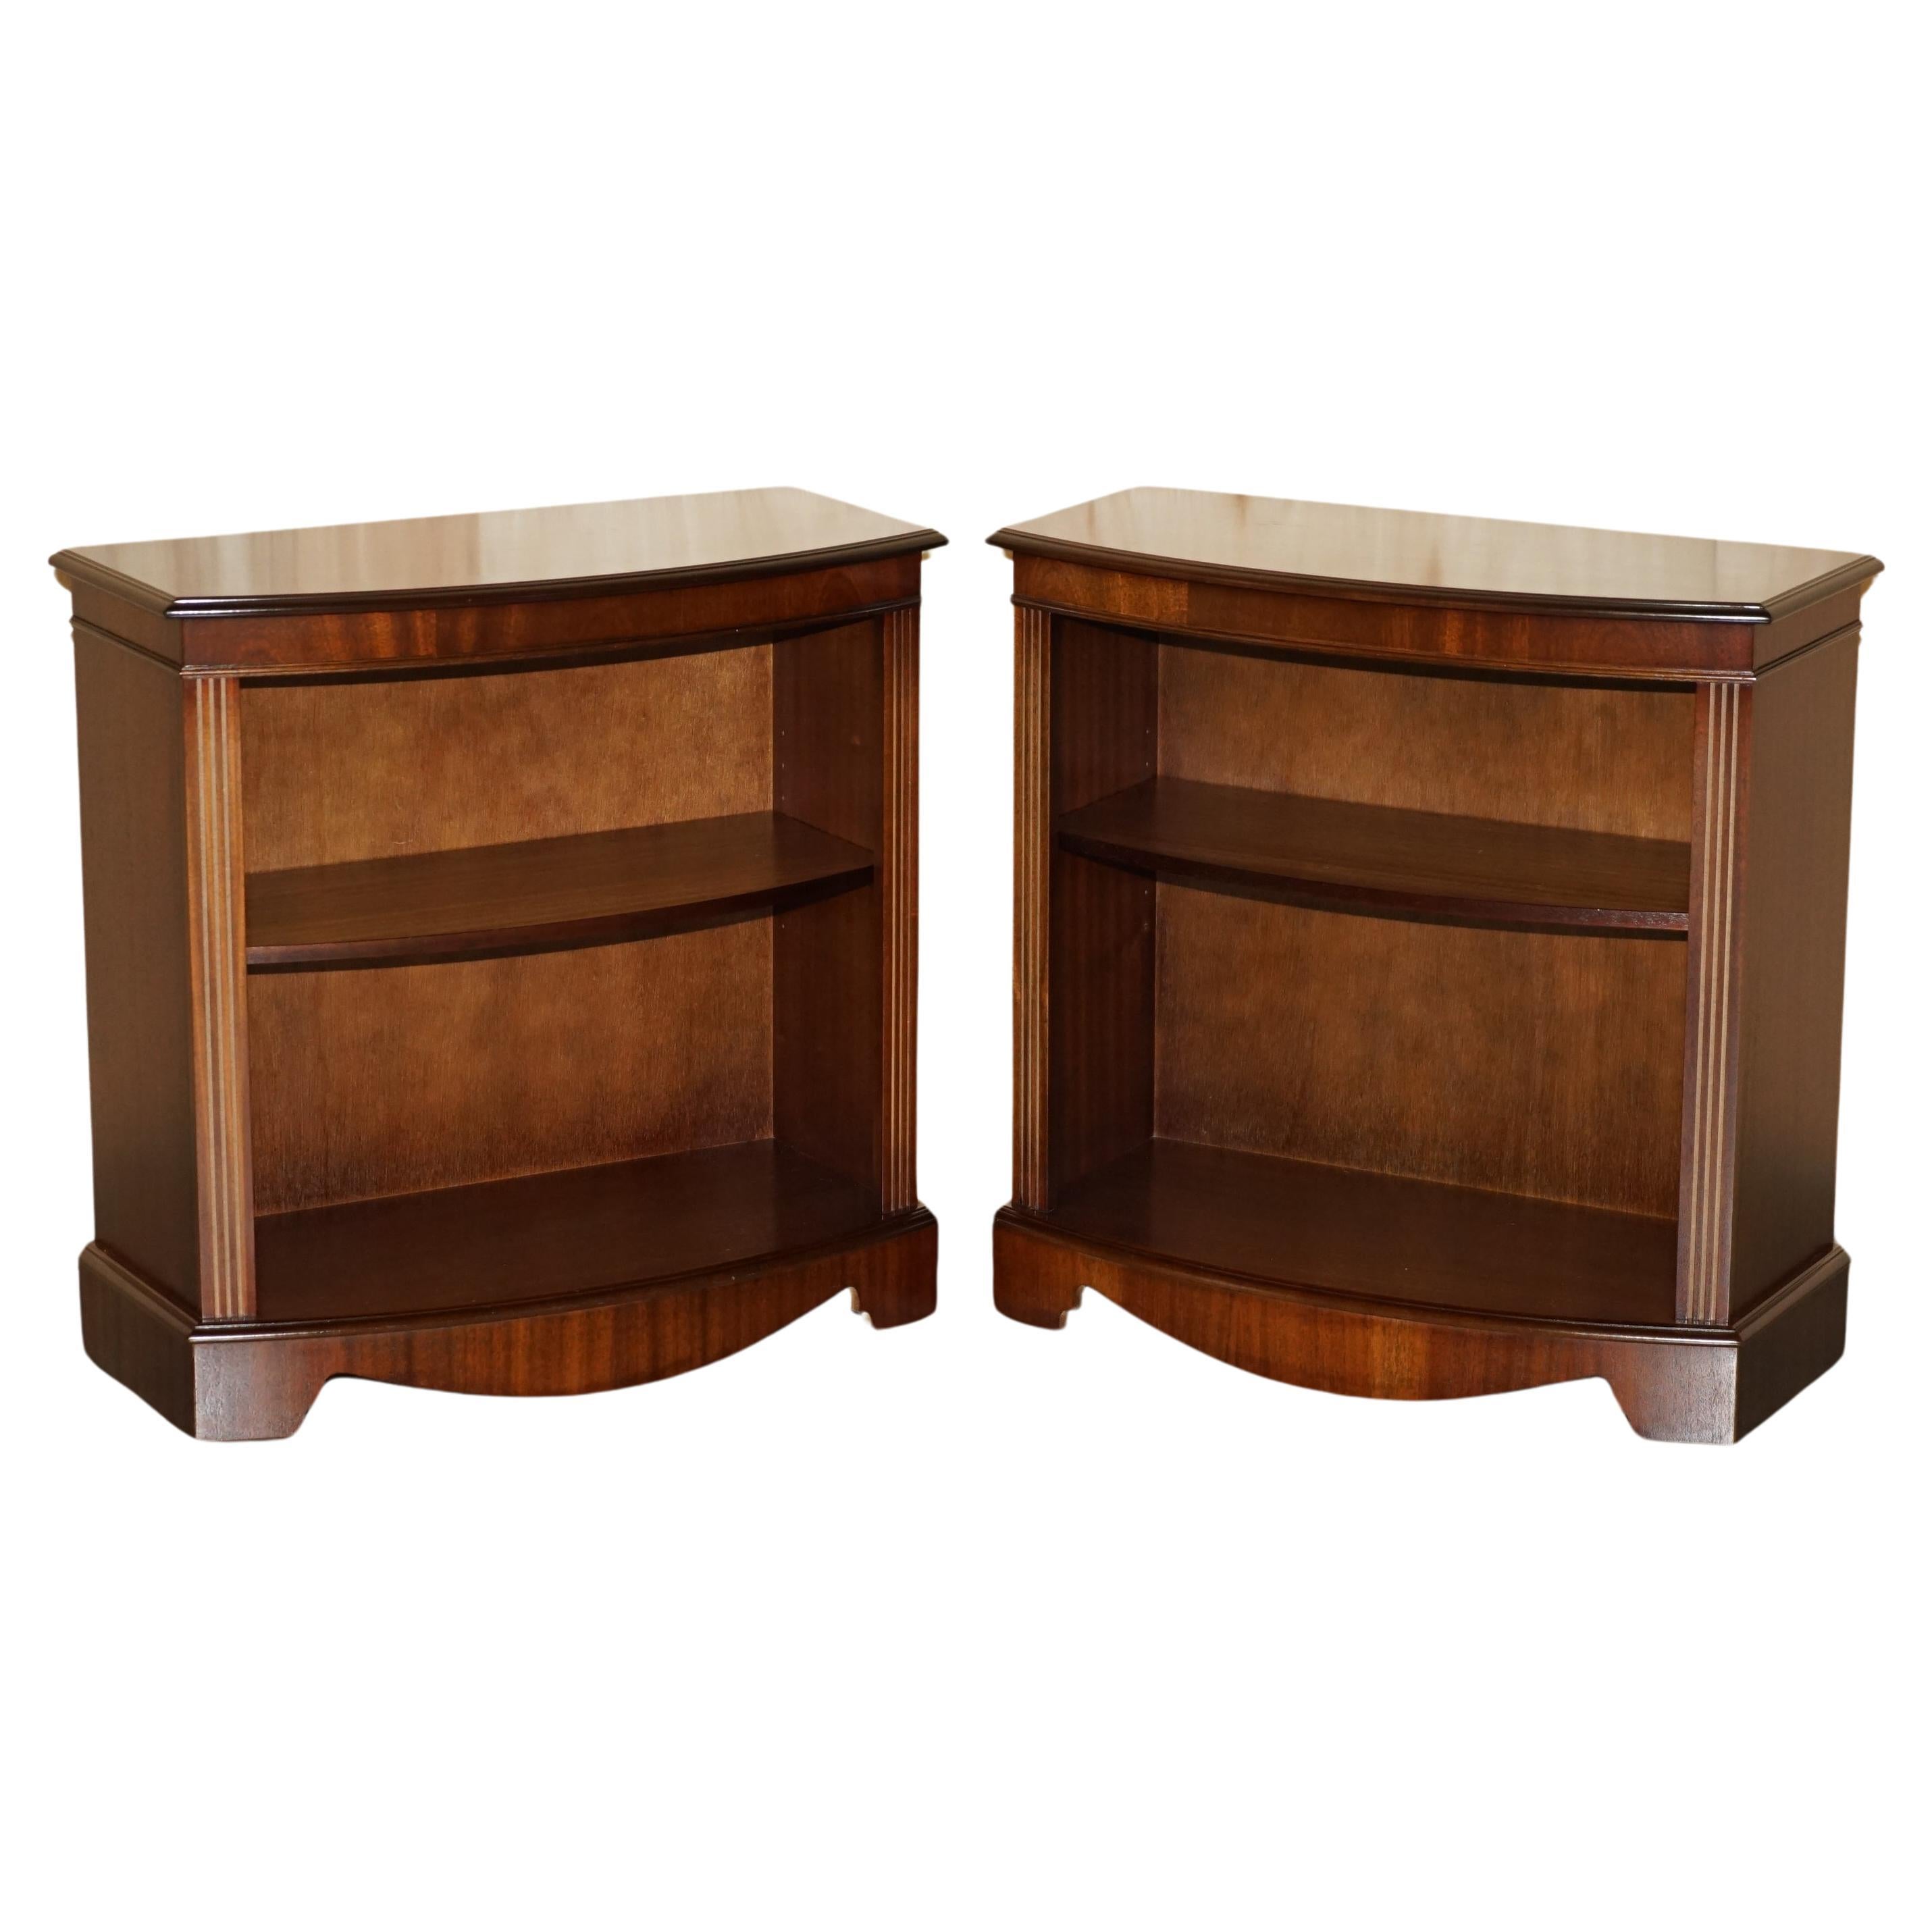 PAIR OF FLAMED HARDWOOD CURVED DWARF OPEN LIBRARY BOOKCASES ADJUSTABLE SHELVEs